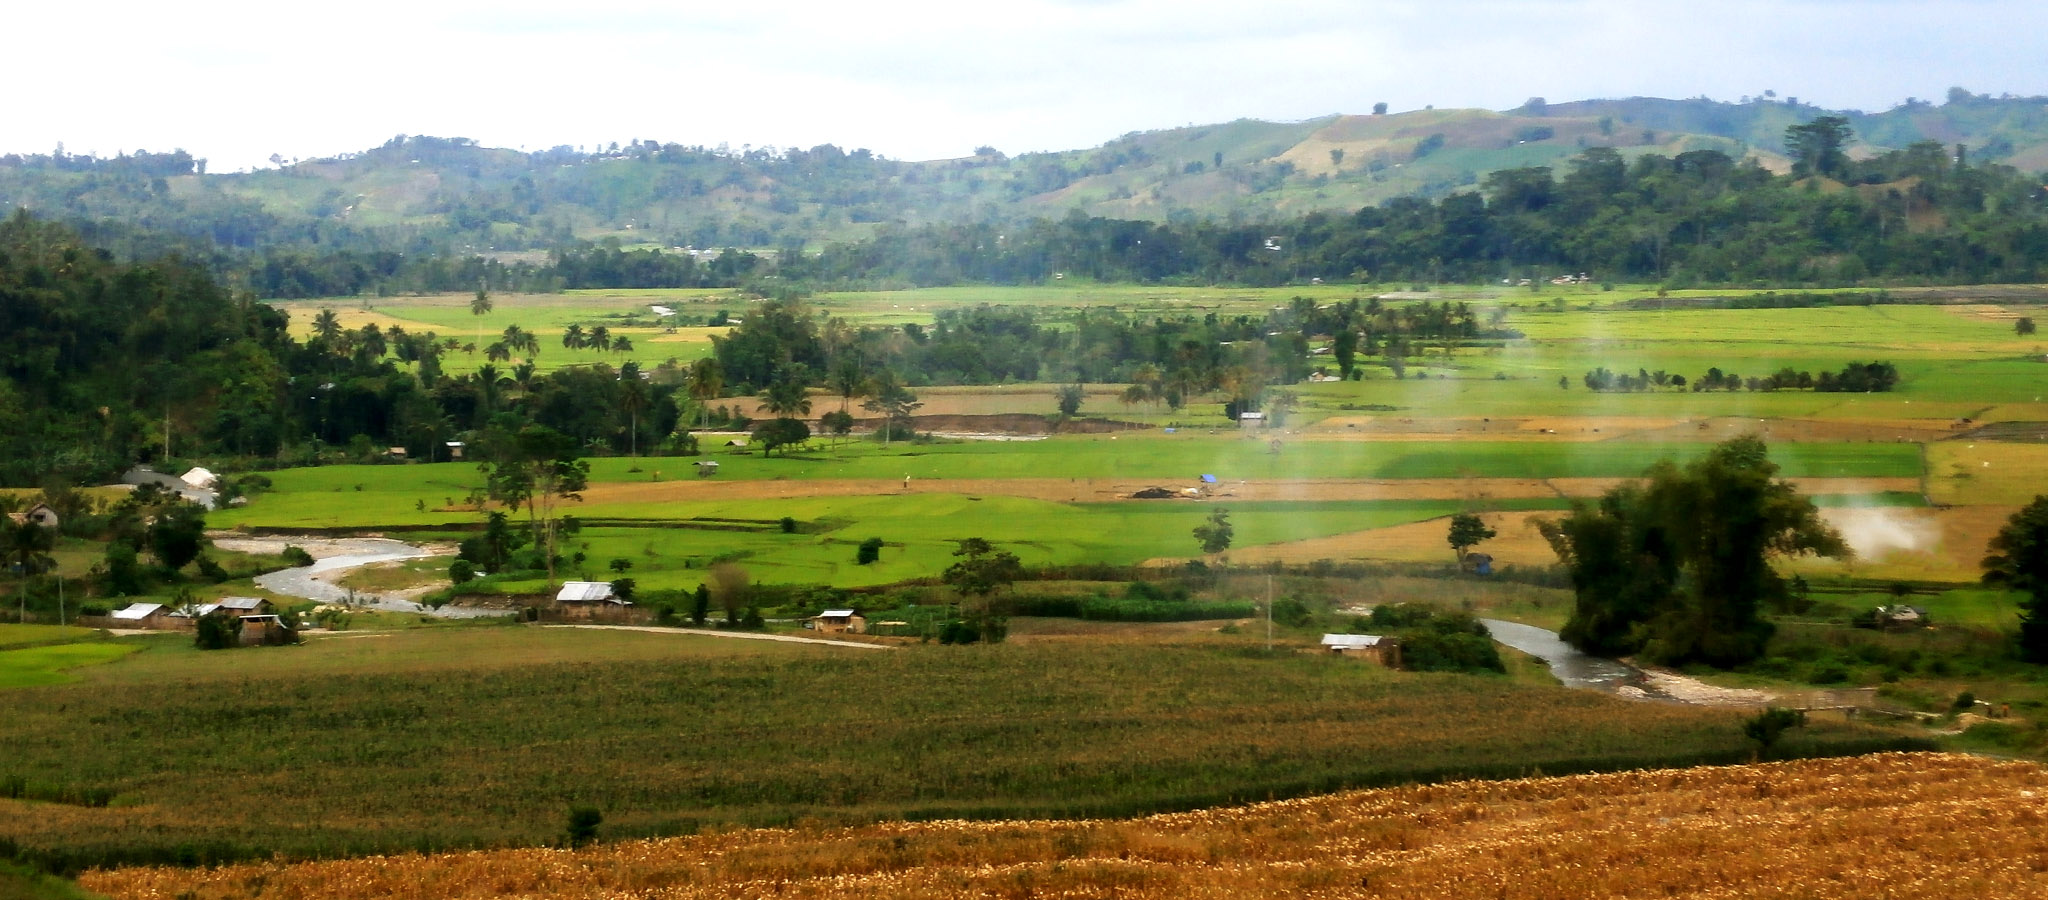 Are small farms still the best option for PH agrarian?